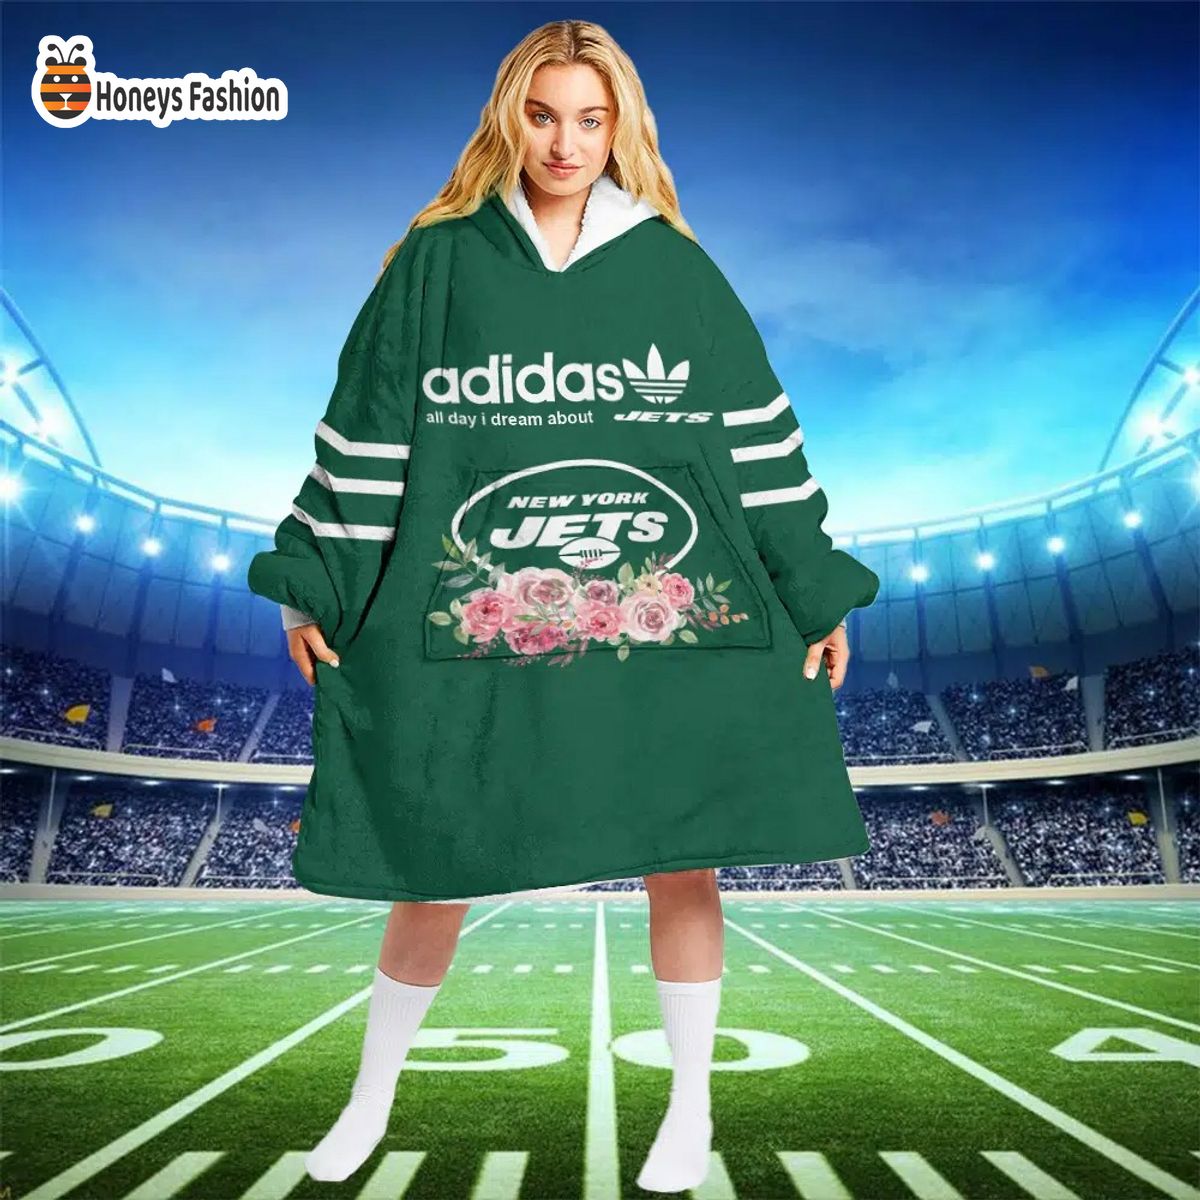 New York Jets NFL Adidas all day i dream about Jets blanket hoodie